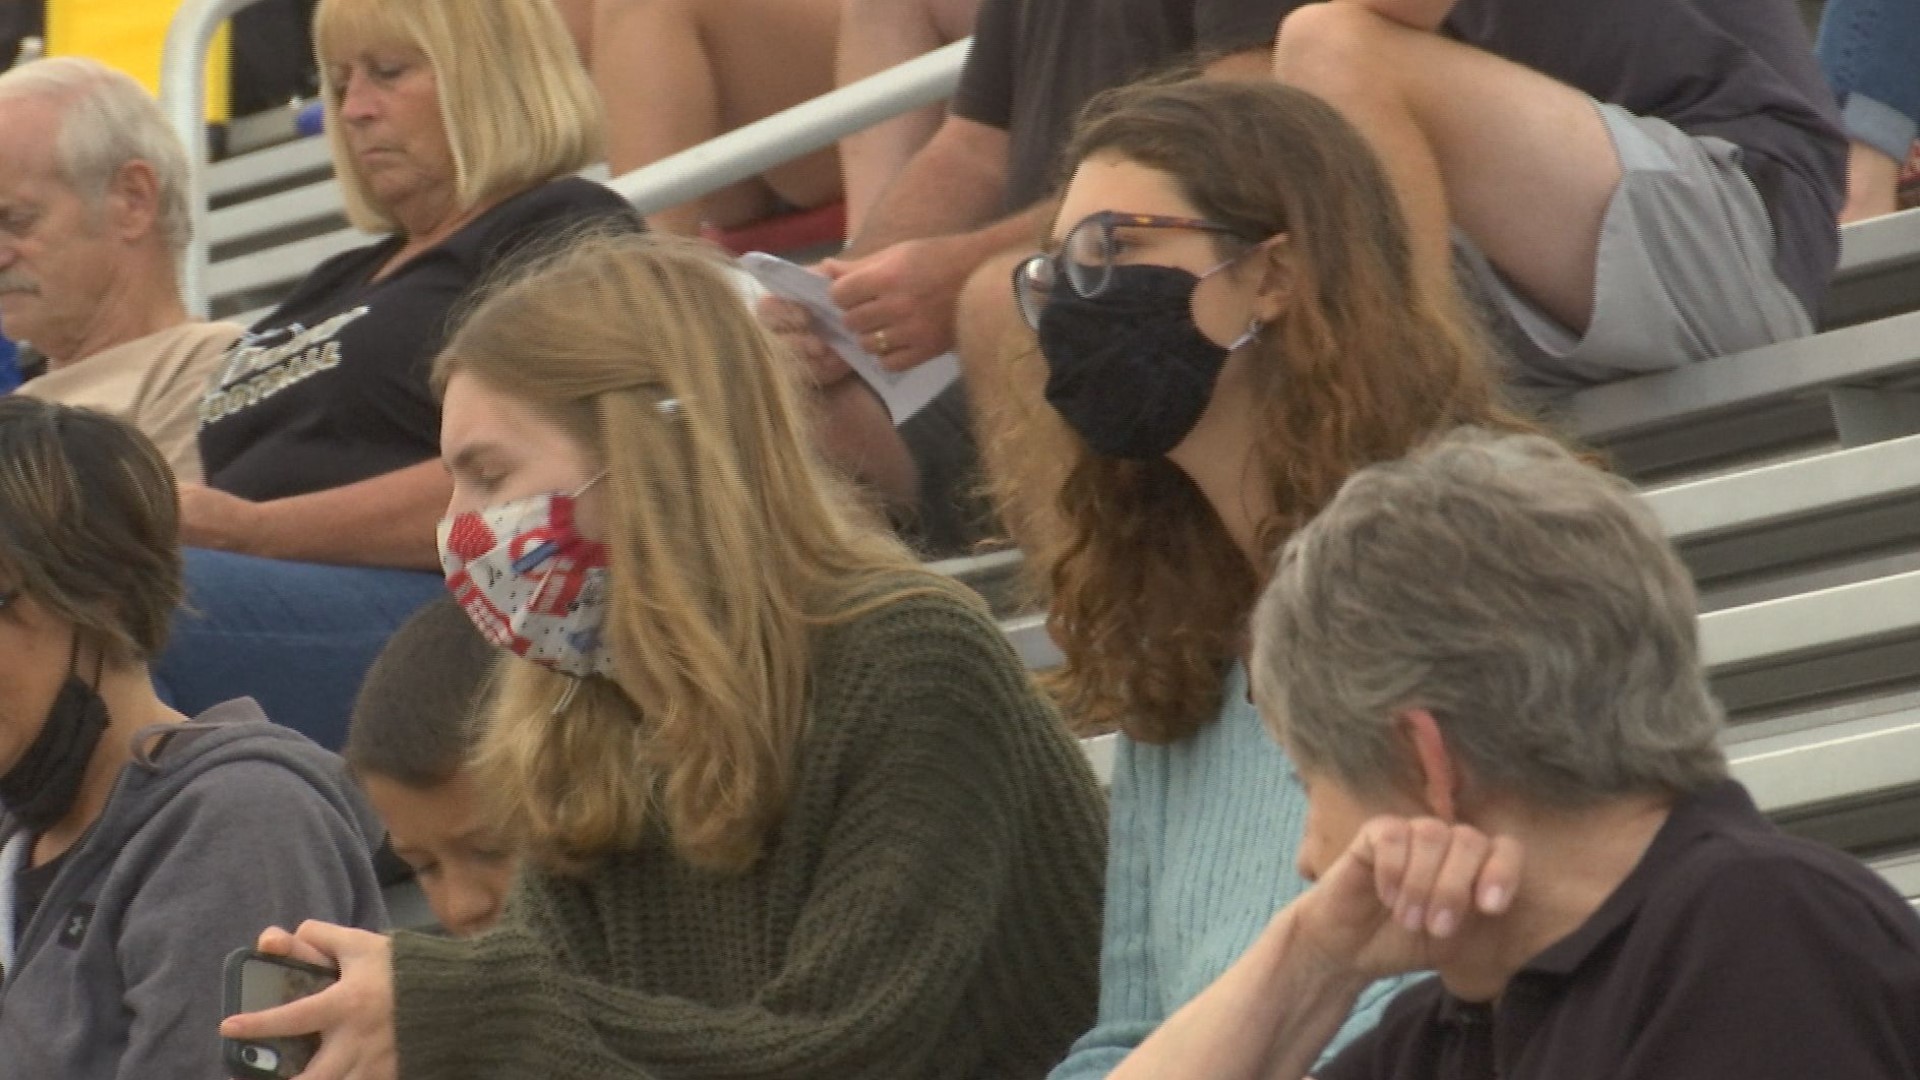 Wyndham is recommending the district require masks for all students. He says the number of quarantines is hindering the district's ability to function.